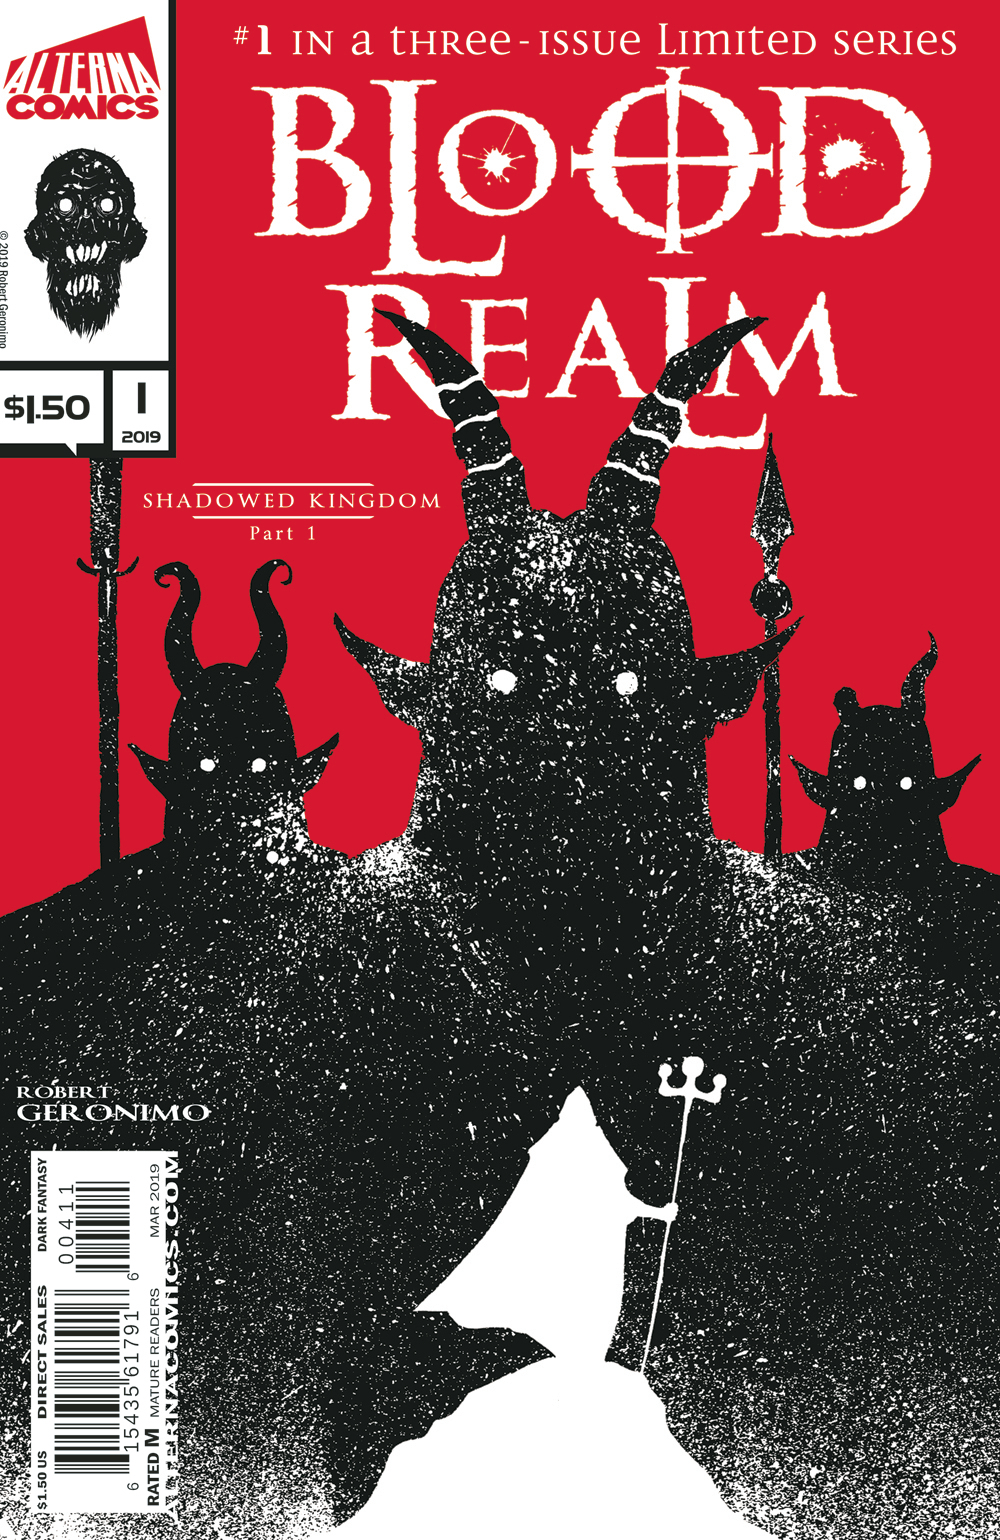 Blood Realm Volume 2 no. 1 (1 of 3) (2019 Series) (MR)